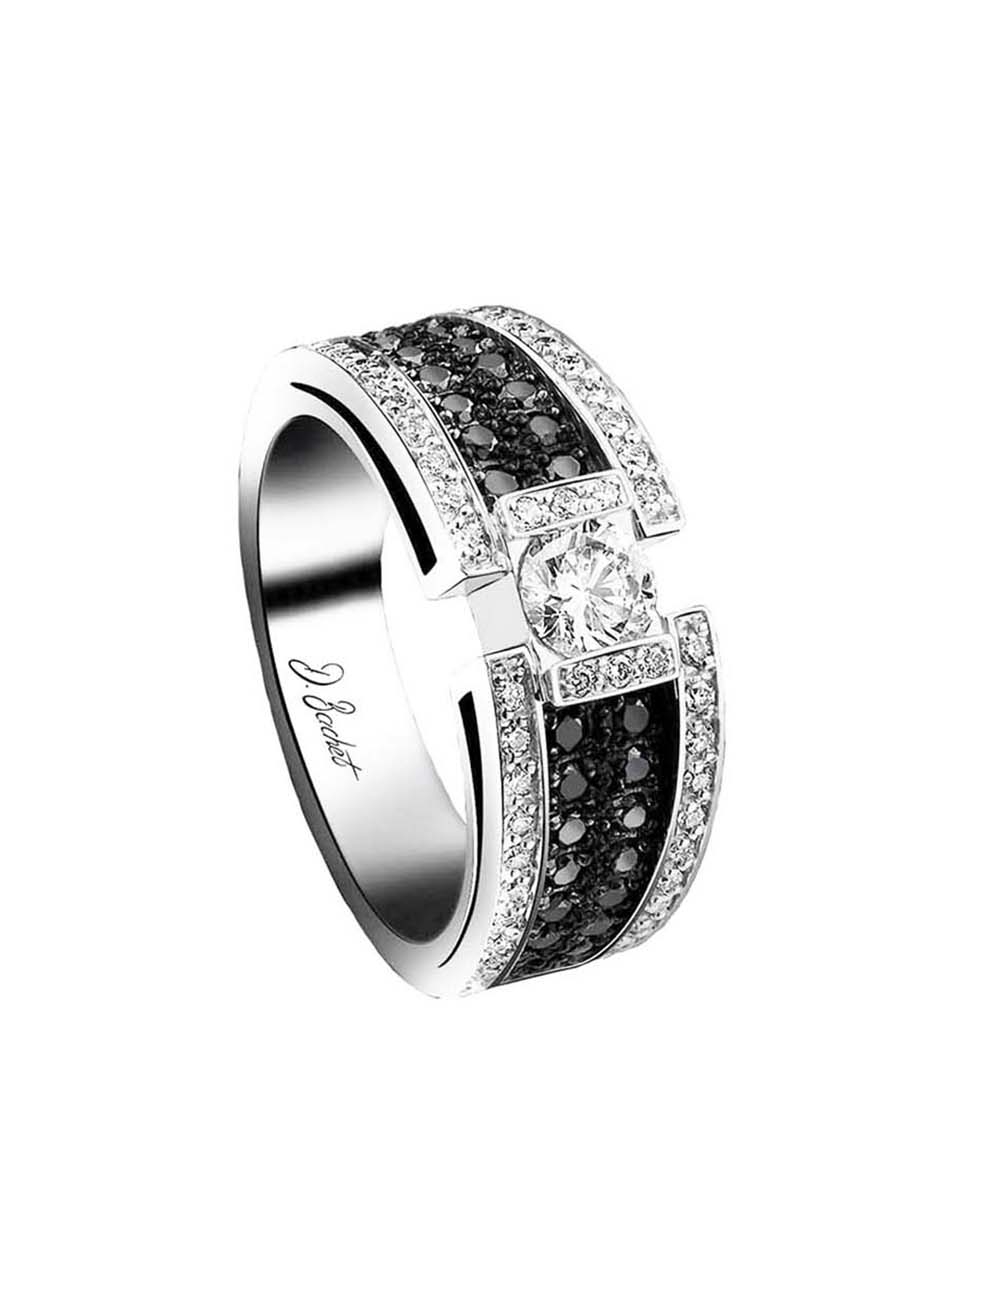 Luxury women's ring set with a 0.50 carat white diamond and a black and white diamonds pavé.